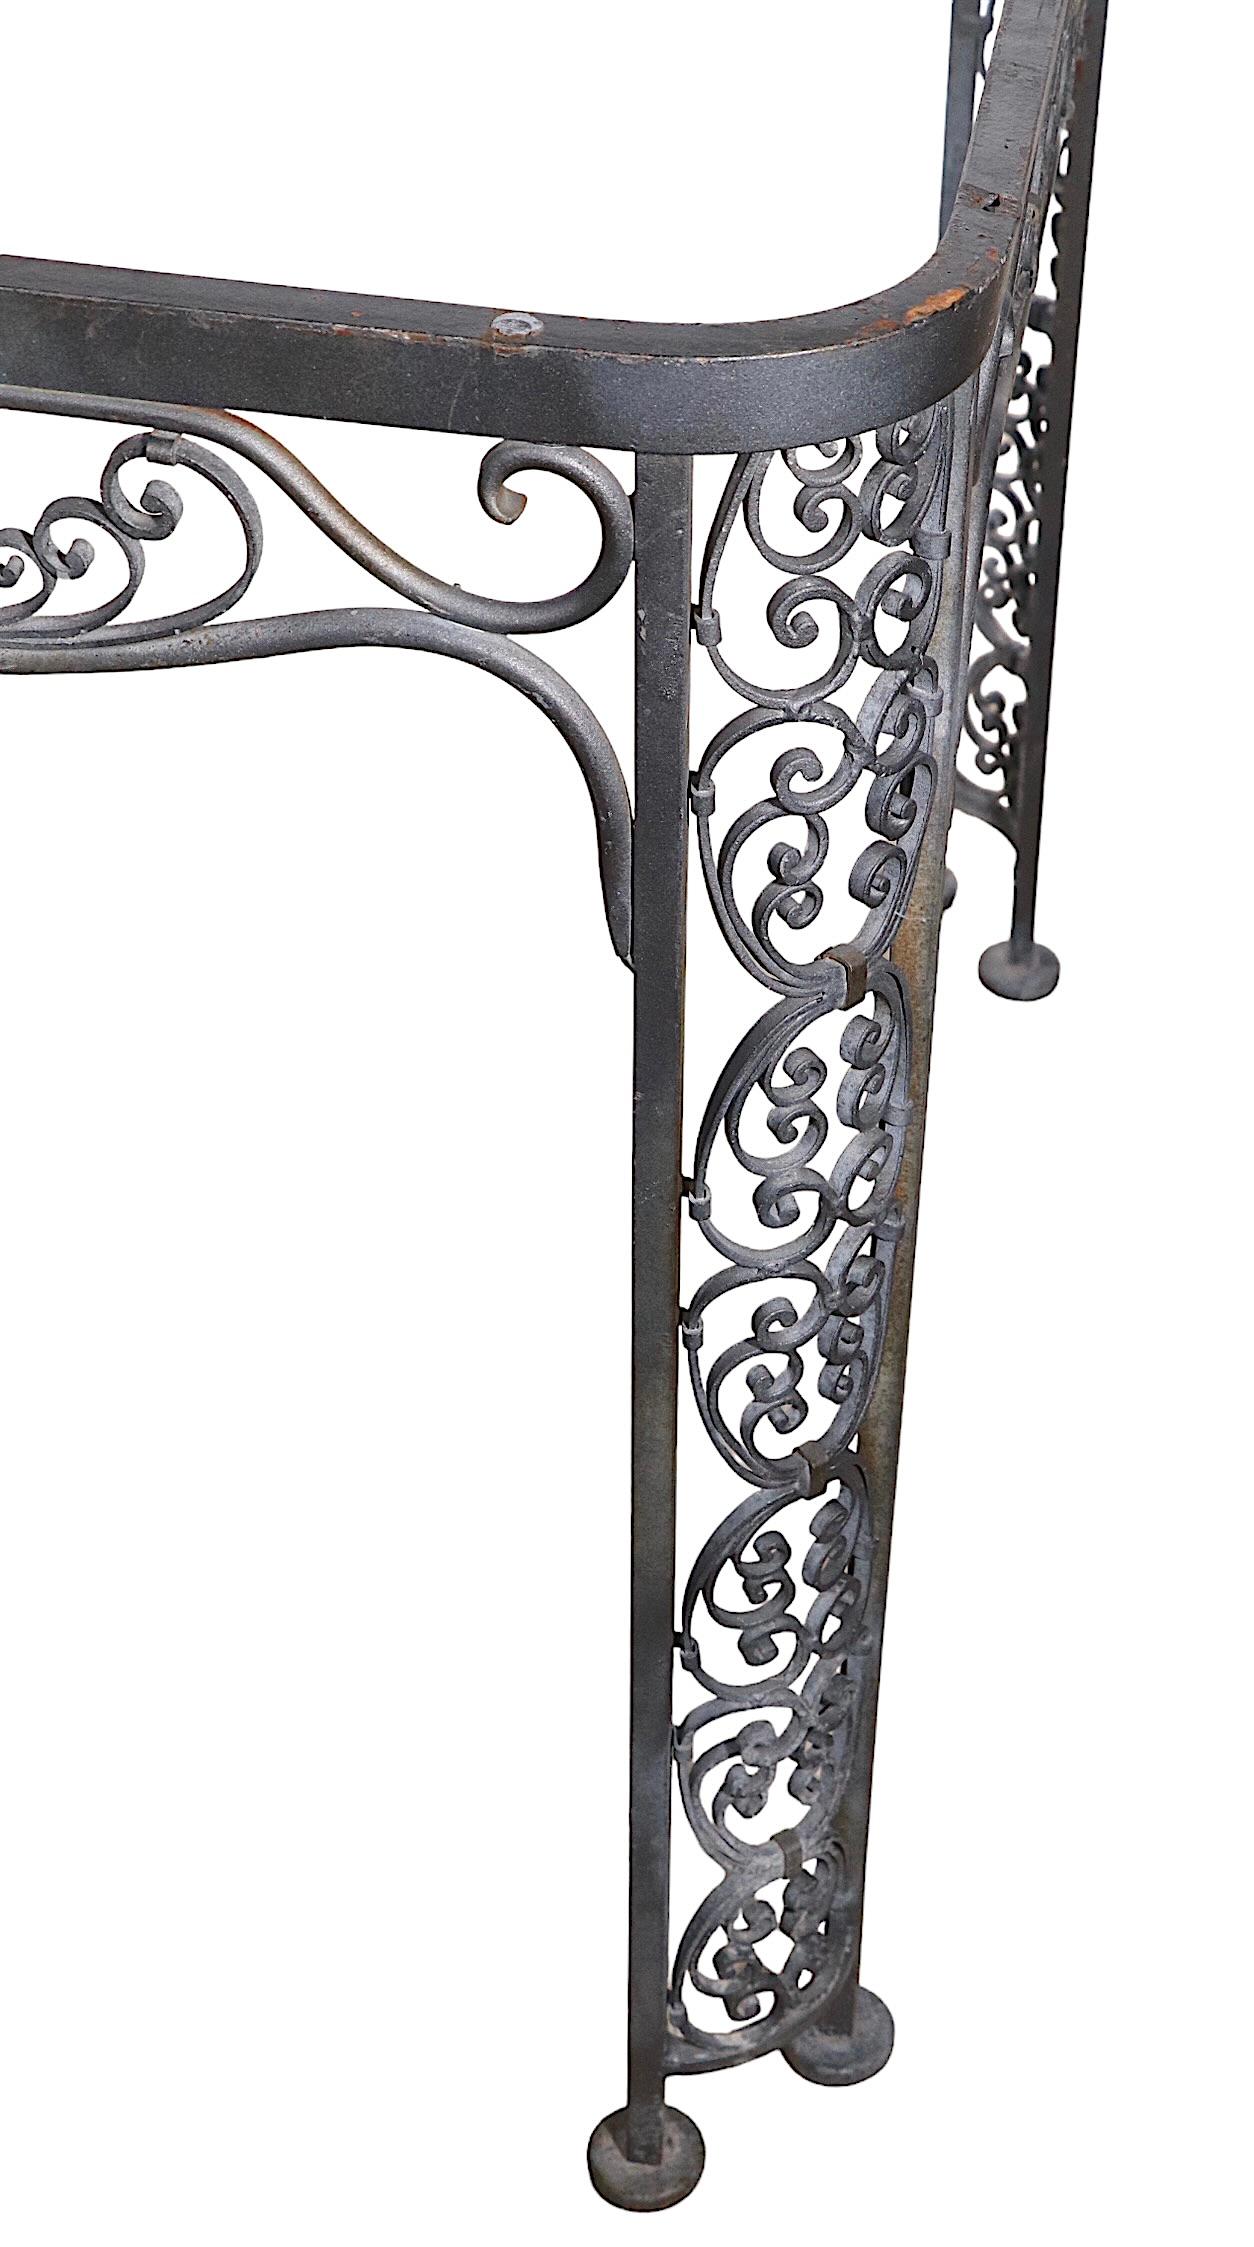 Ornate Wrought Iron Garden Patio Poolside Dining Table by Lee Woodard, c 1940's For Sale 1